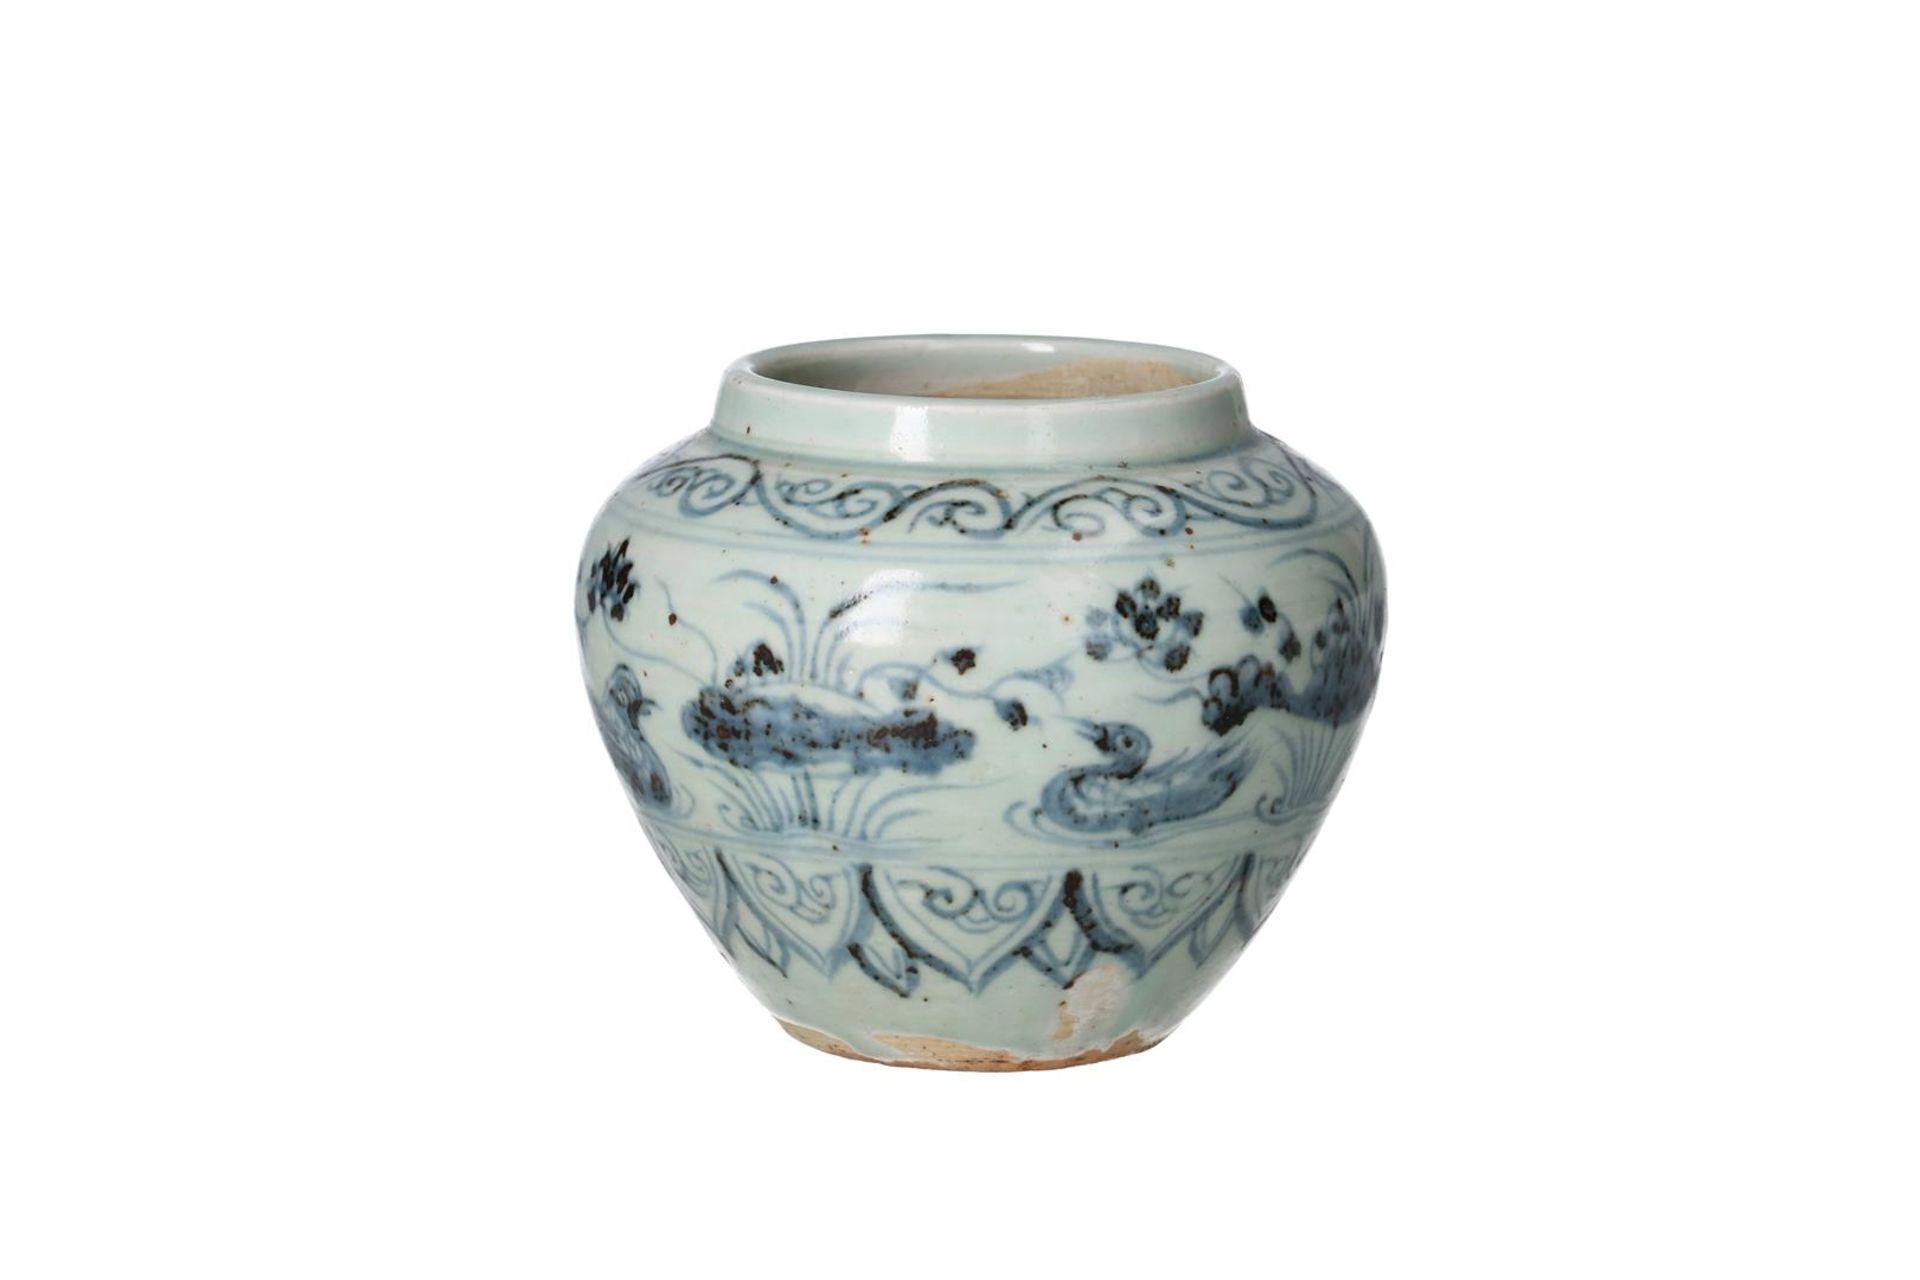 A blue and white porcelain jar, decorated with mandarin ducks and water plants. Unmarked. China, - Image 3 of 6